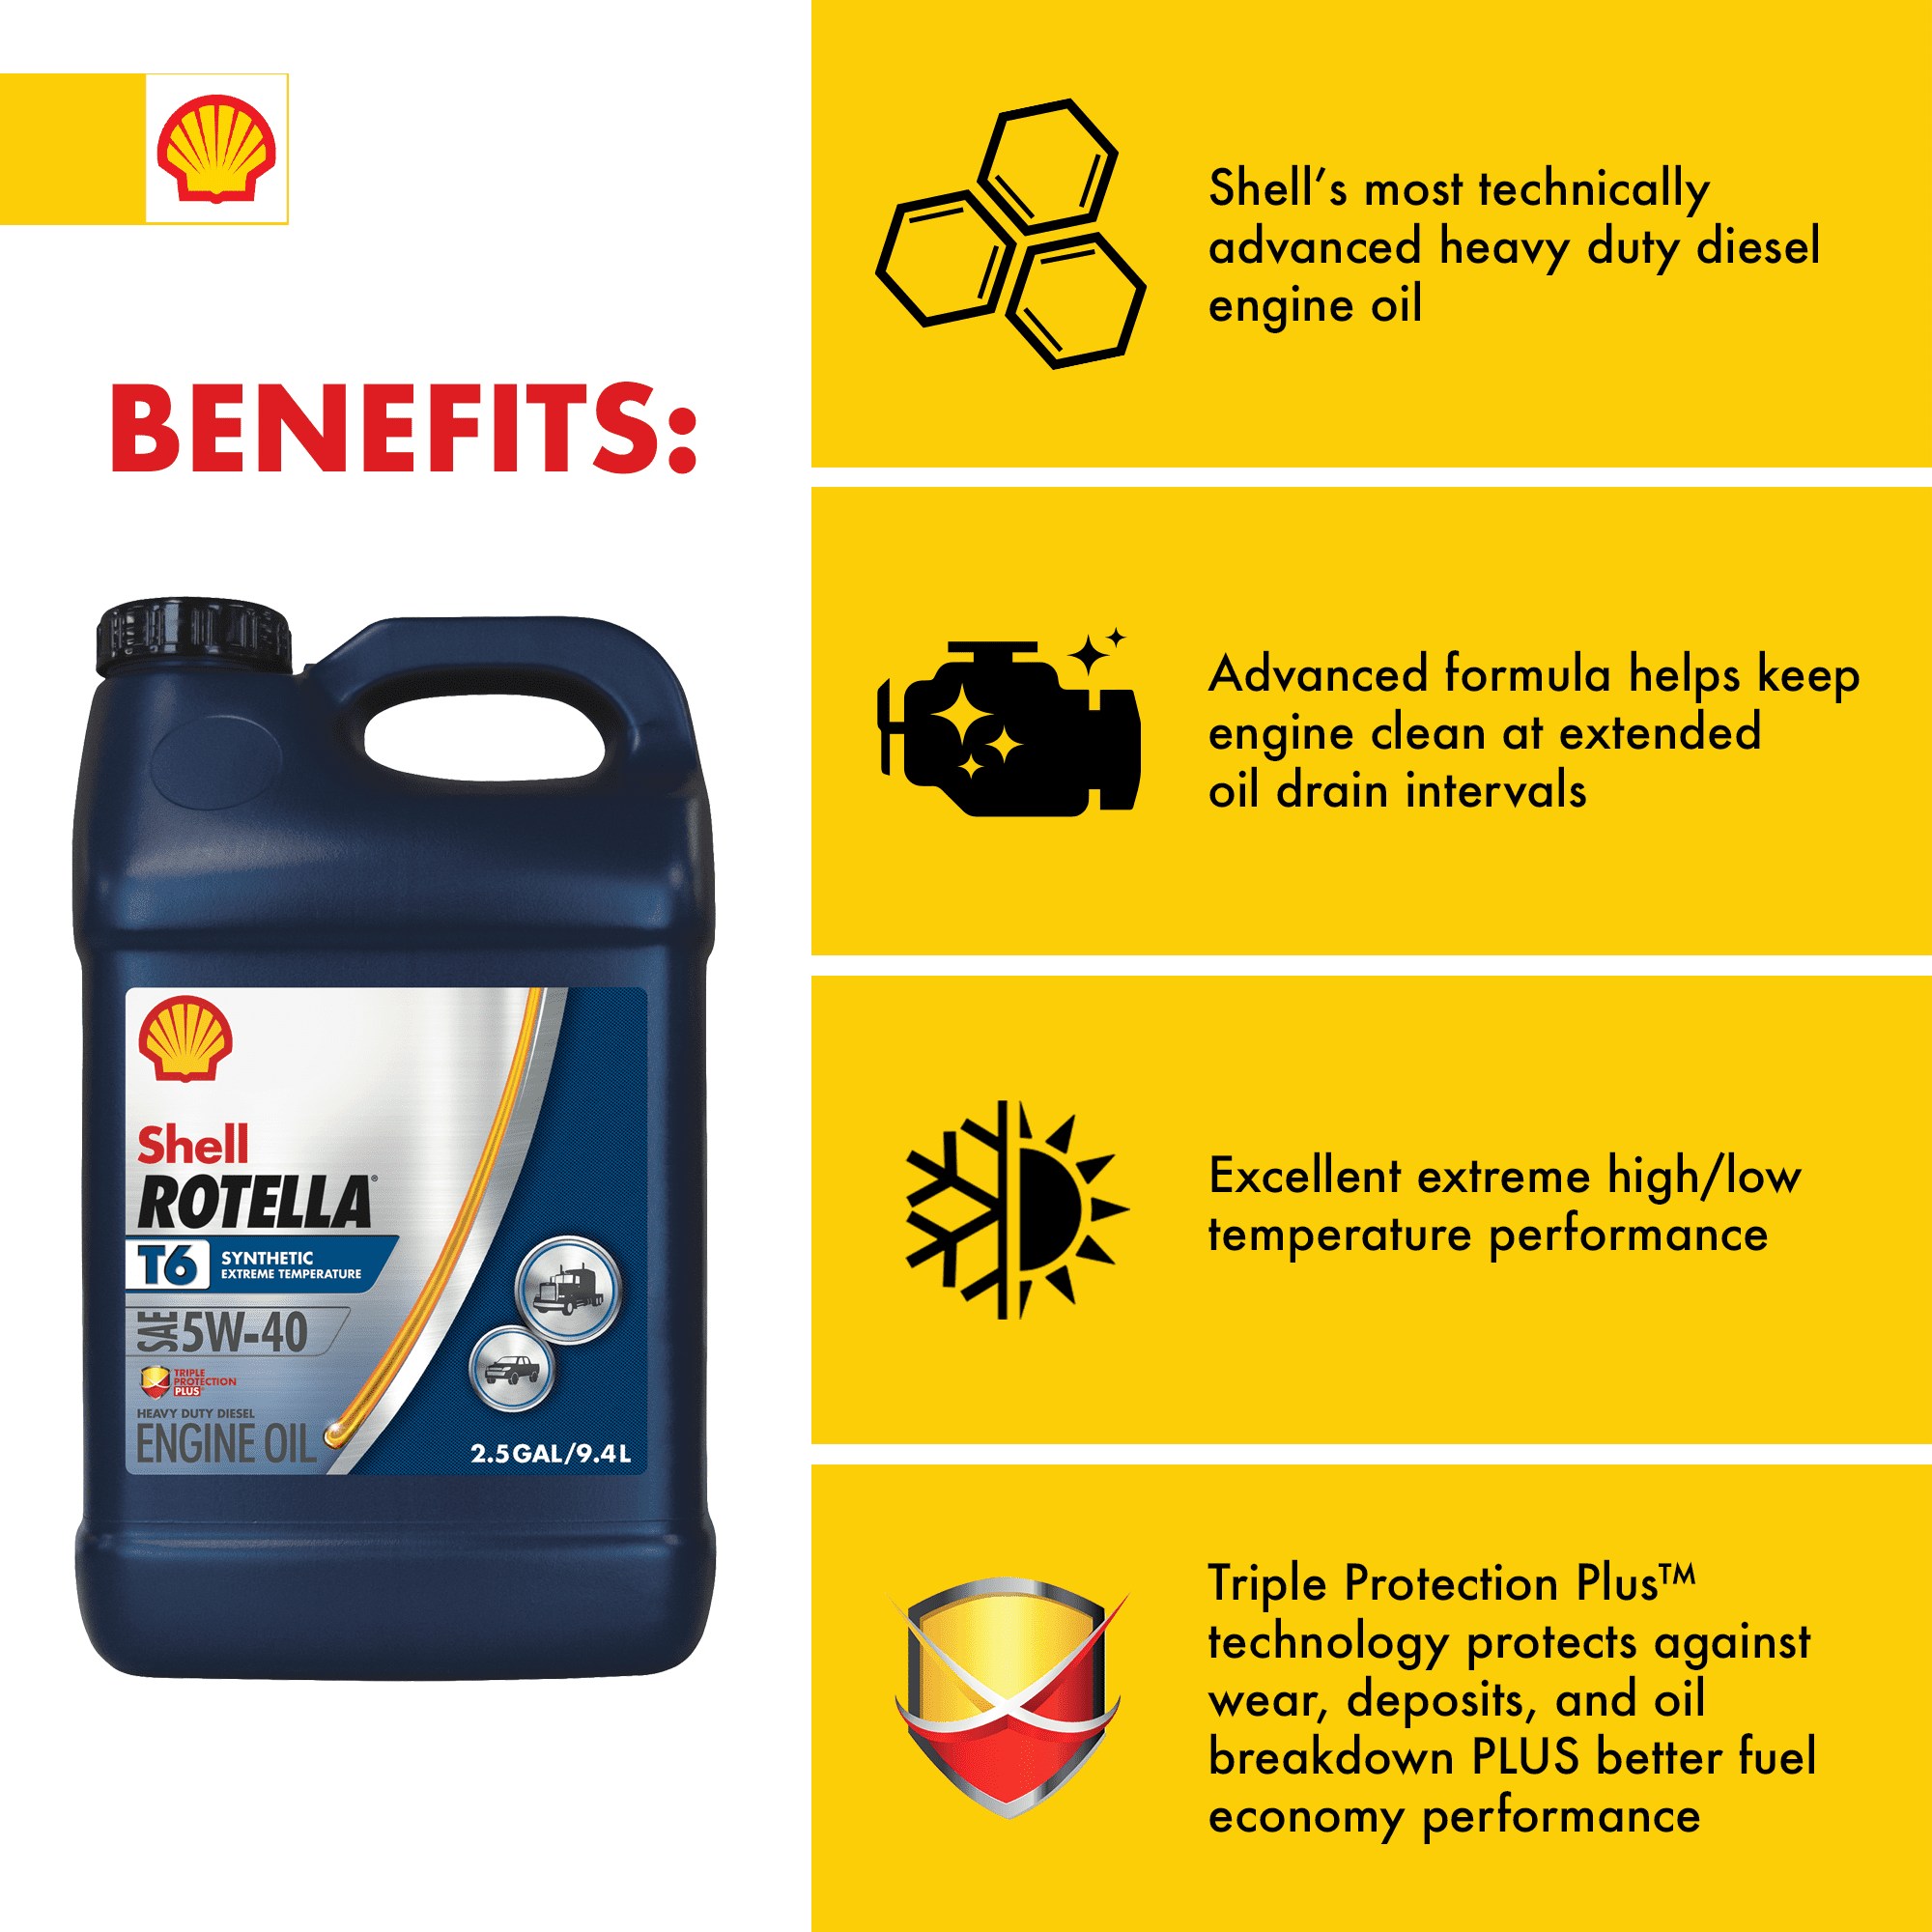 Shell Rotella T6 Full Synthetic 5W-40 Diesel Engine Oil, 2.5 Gallon - 1